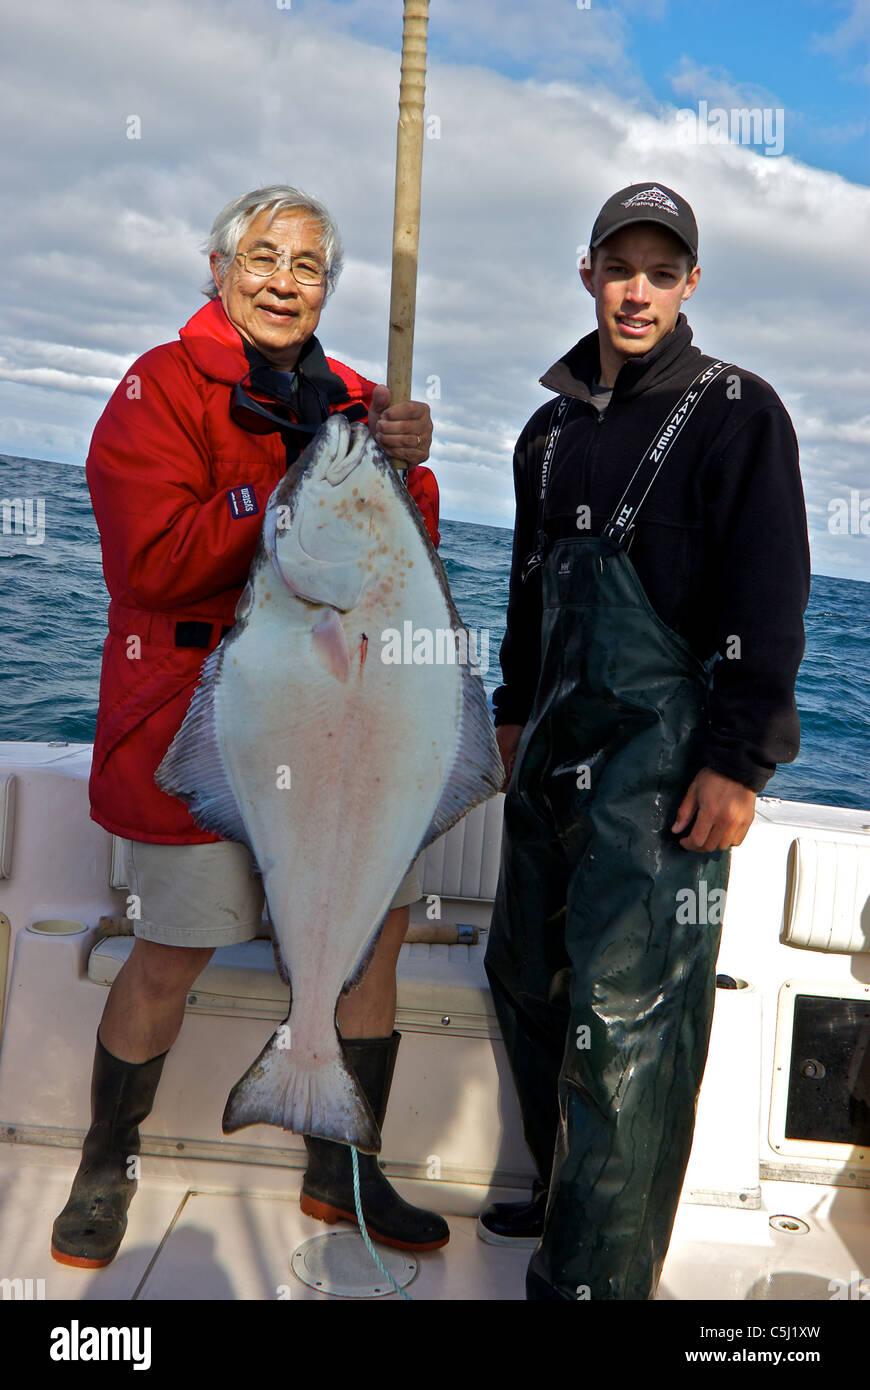 Sport fishing guide charter and guest holding halibut rough seas open Pacific Ocean Kyuquot Sound BC Stock Photo